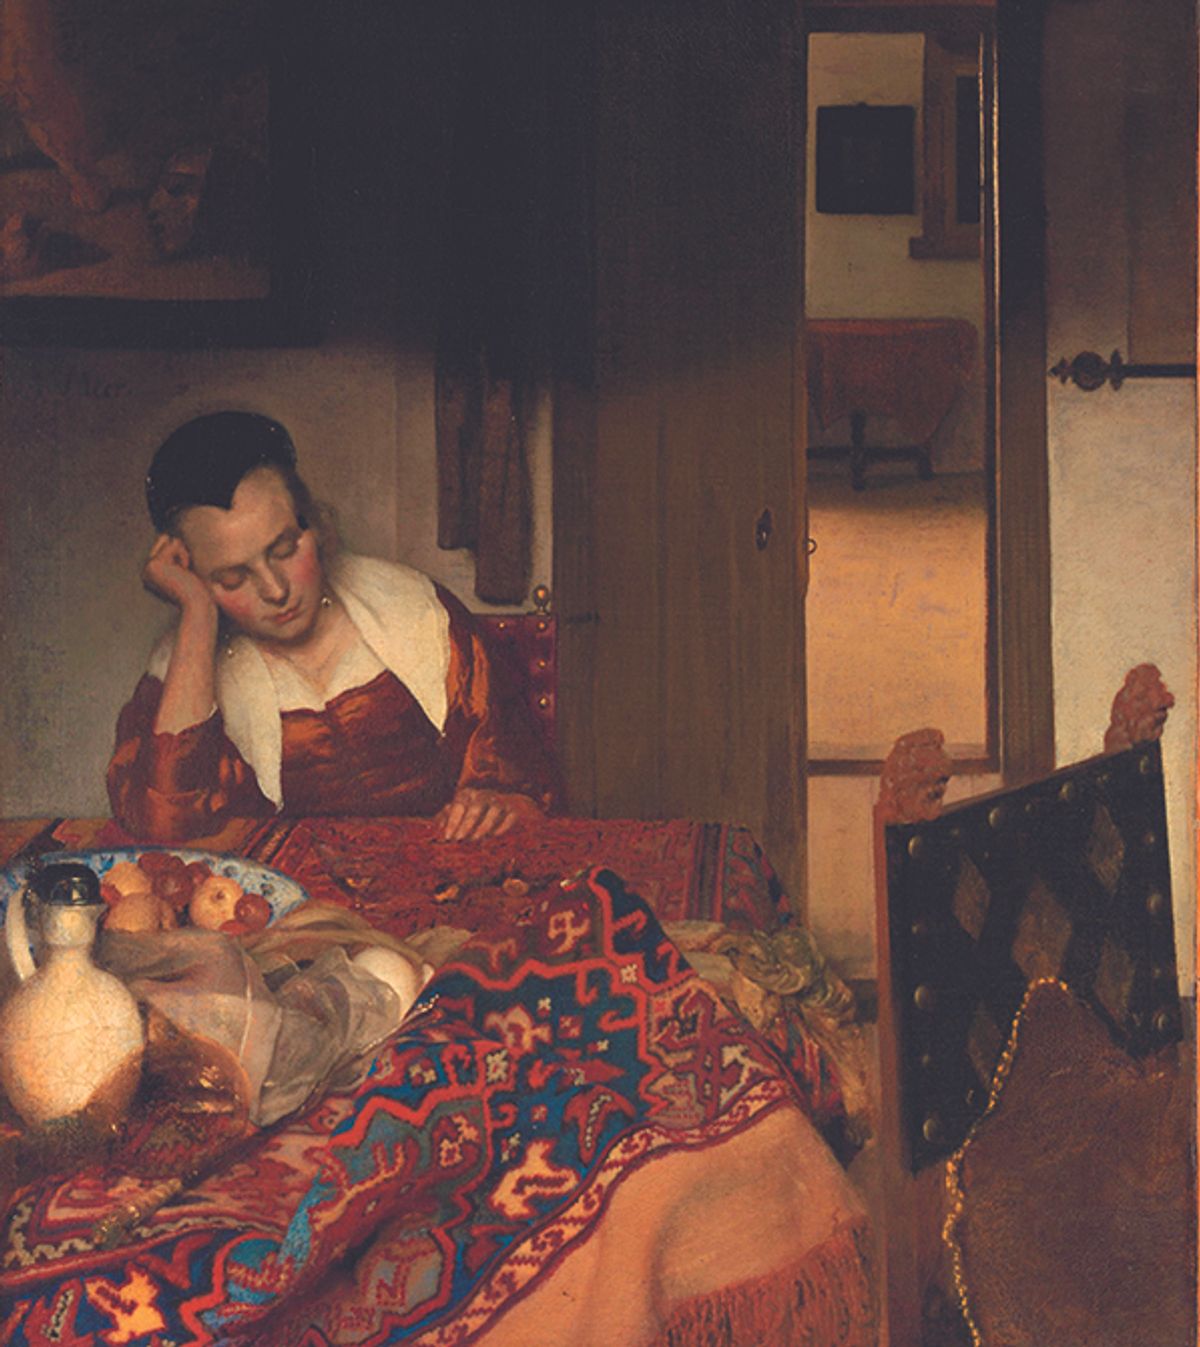 Vermeer's A Maid Asleep (around 1656-57) originally included a reflected portrait of the artist in a mirror: the maid may be an exhausted model